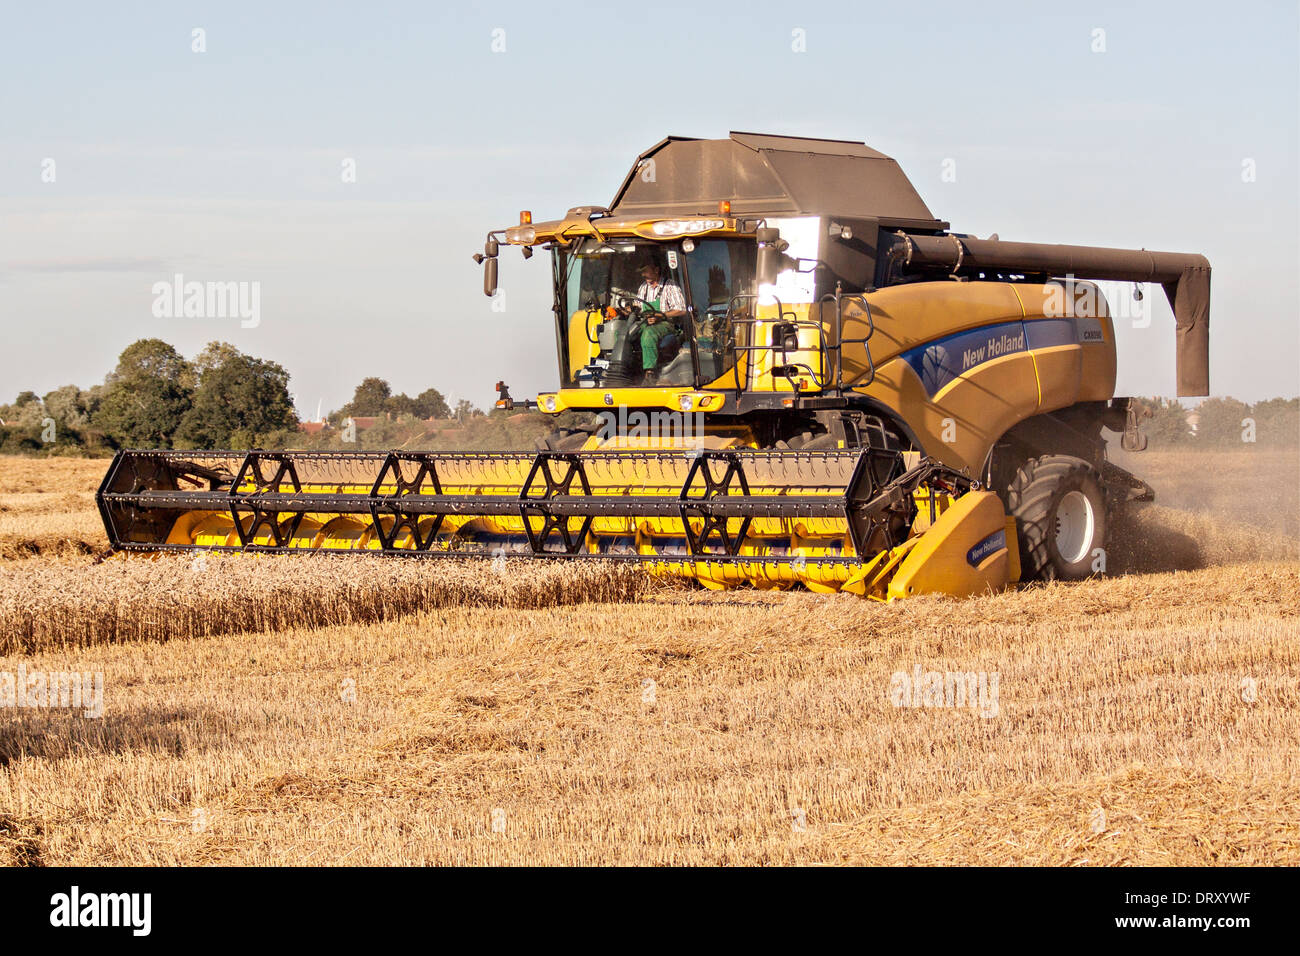 New Holland CX8090 combine harvester at work Stock Photo